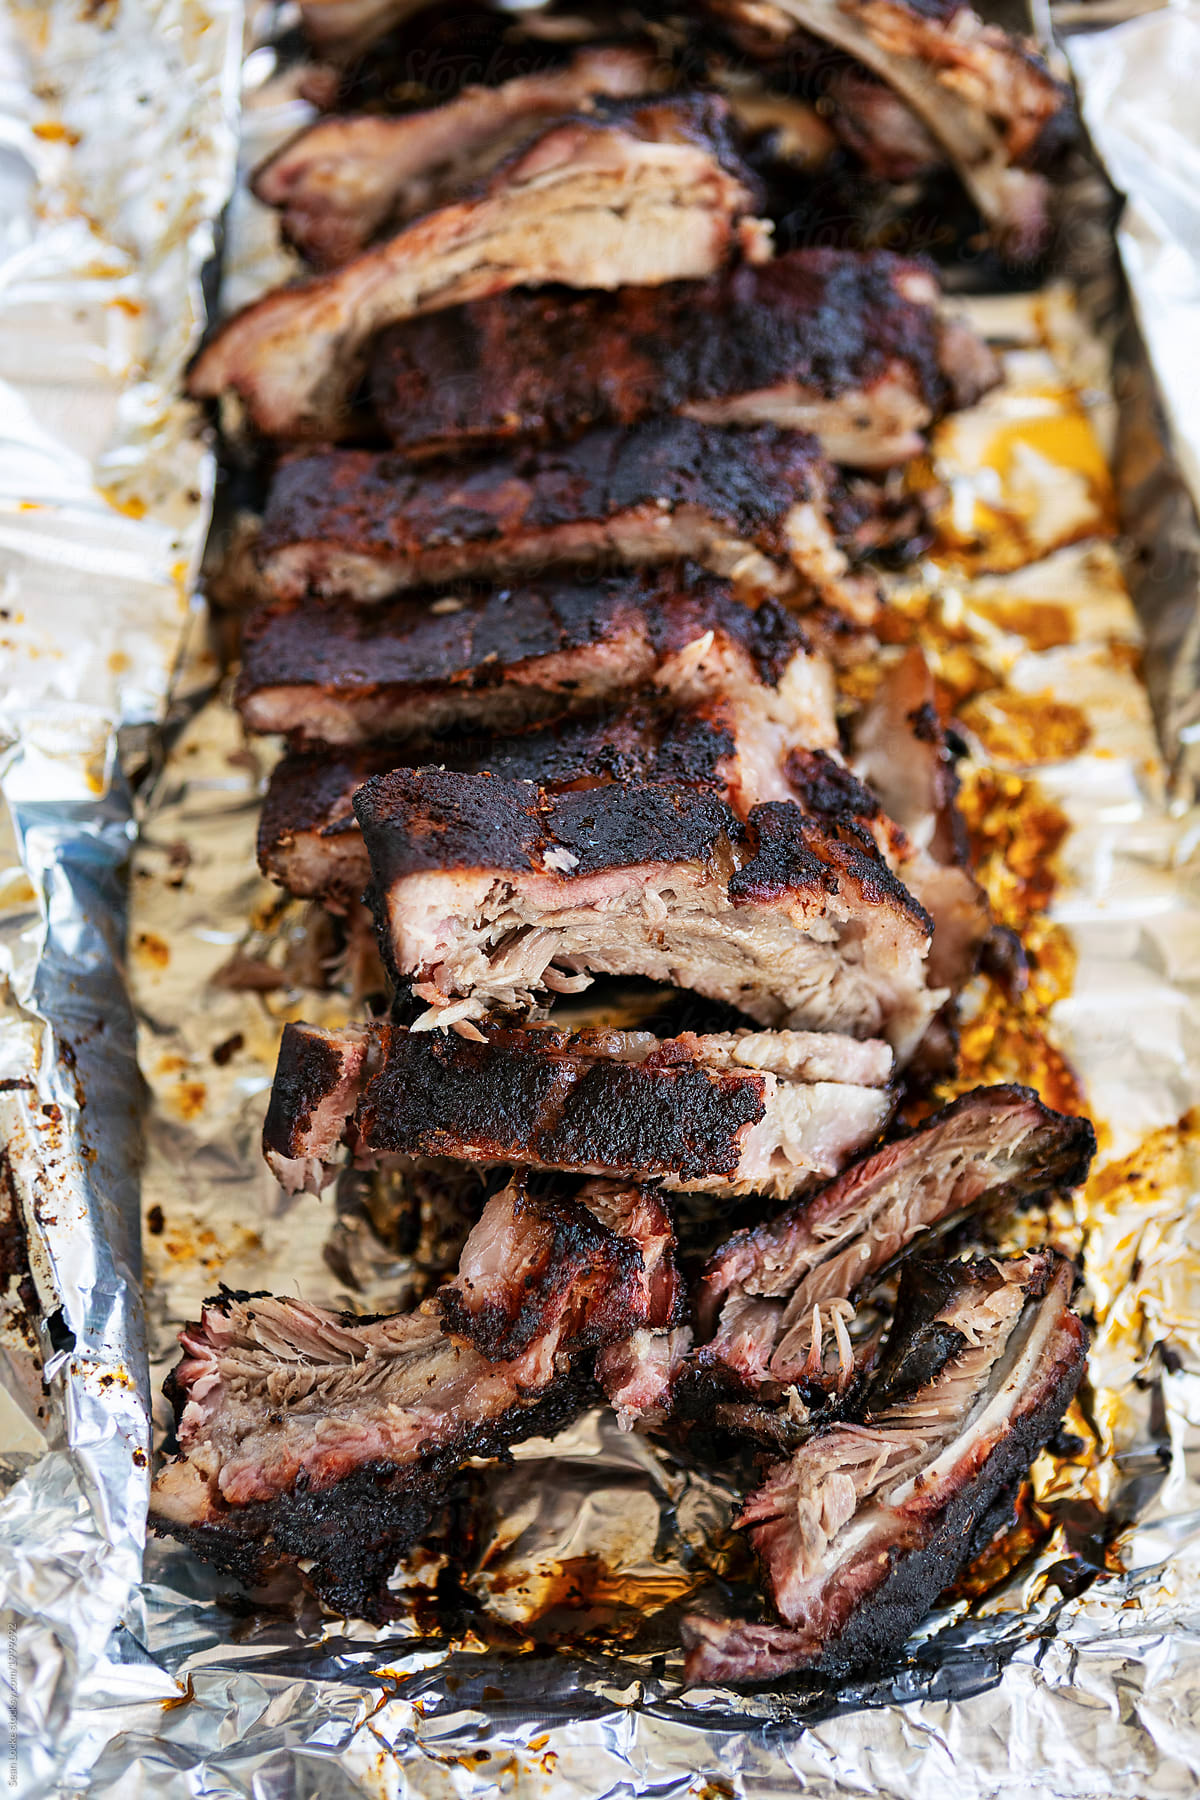 Smoked: Mesquite And Dry Rubbed Baby Back Ribs Cut Up